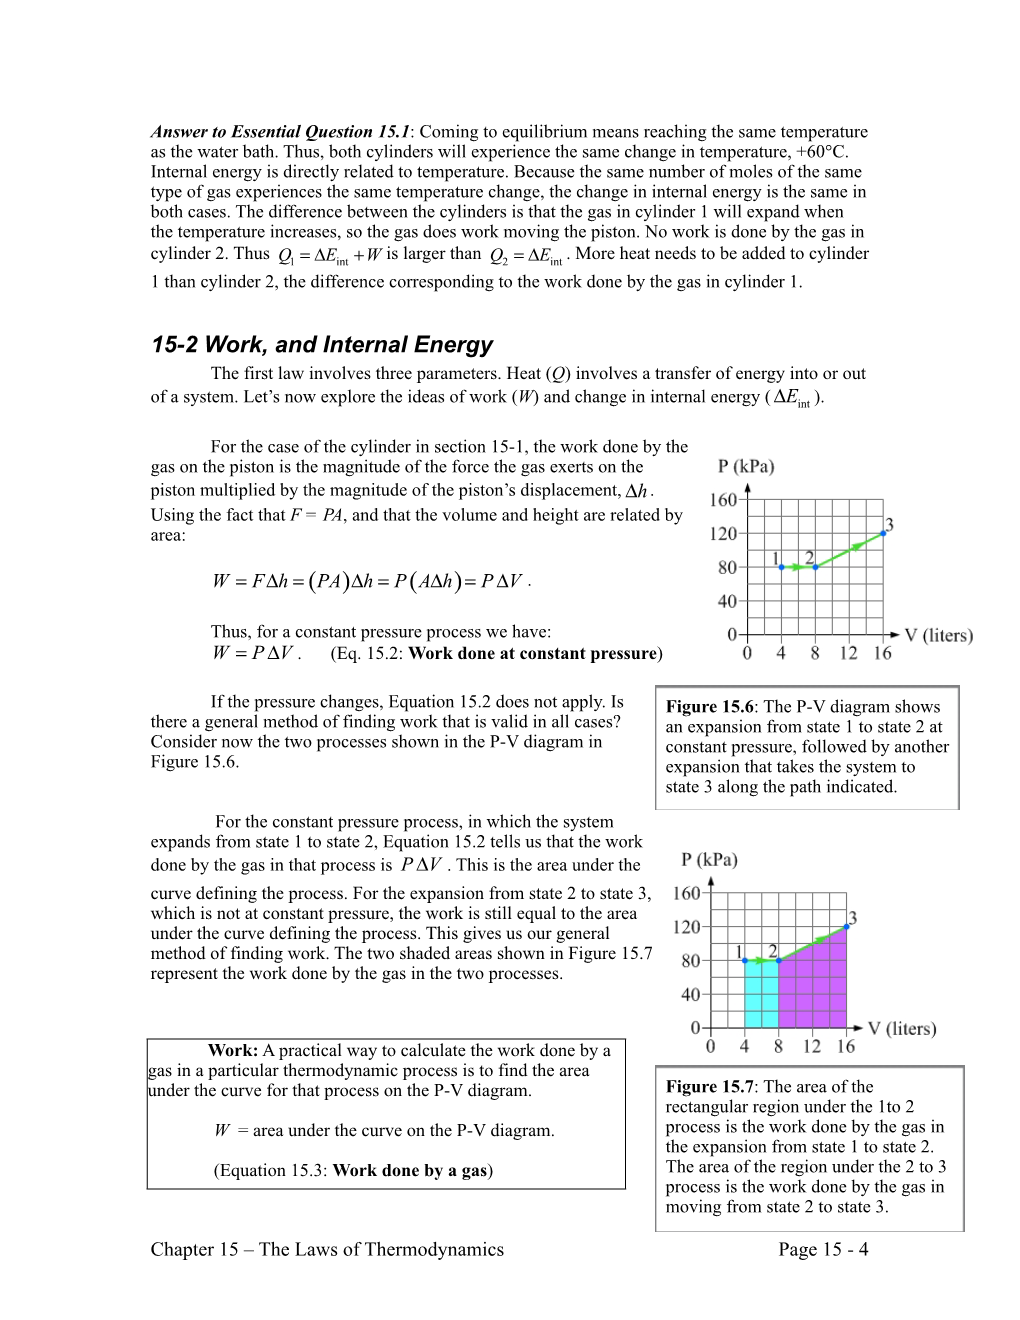 Section 15-2: Work, and Internal Energy